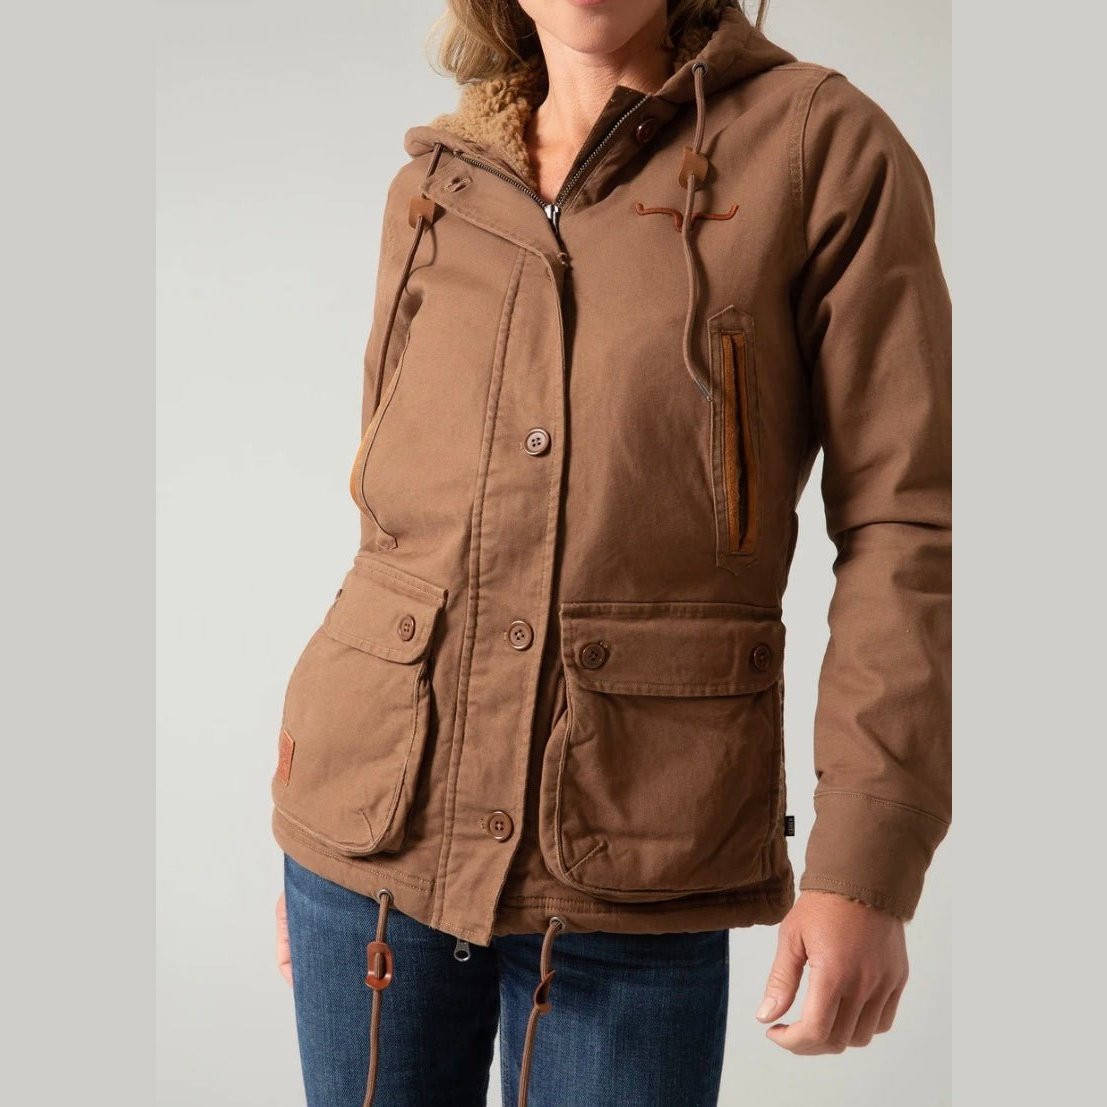 Kimes Ranch Women's Jacket Anorak Cool Weather Black ,Rust or Brown - Kimes Ranch